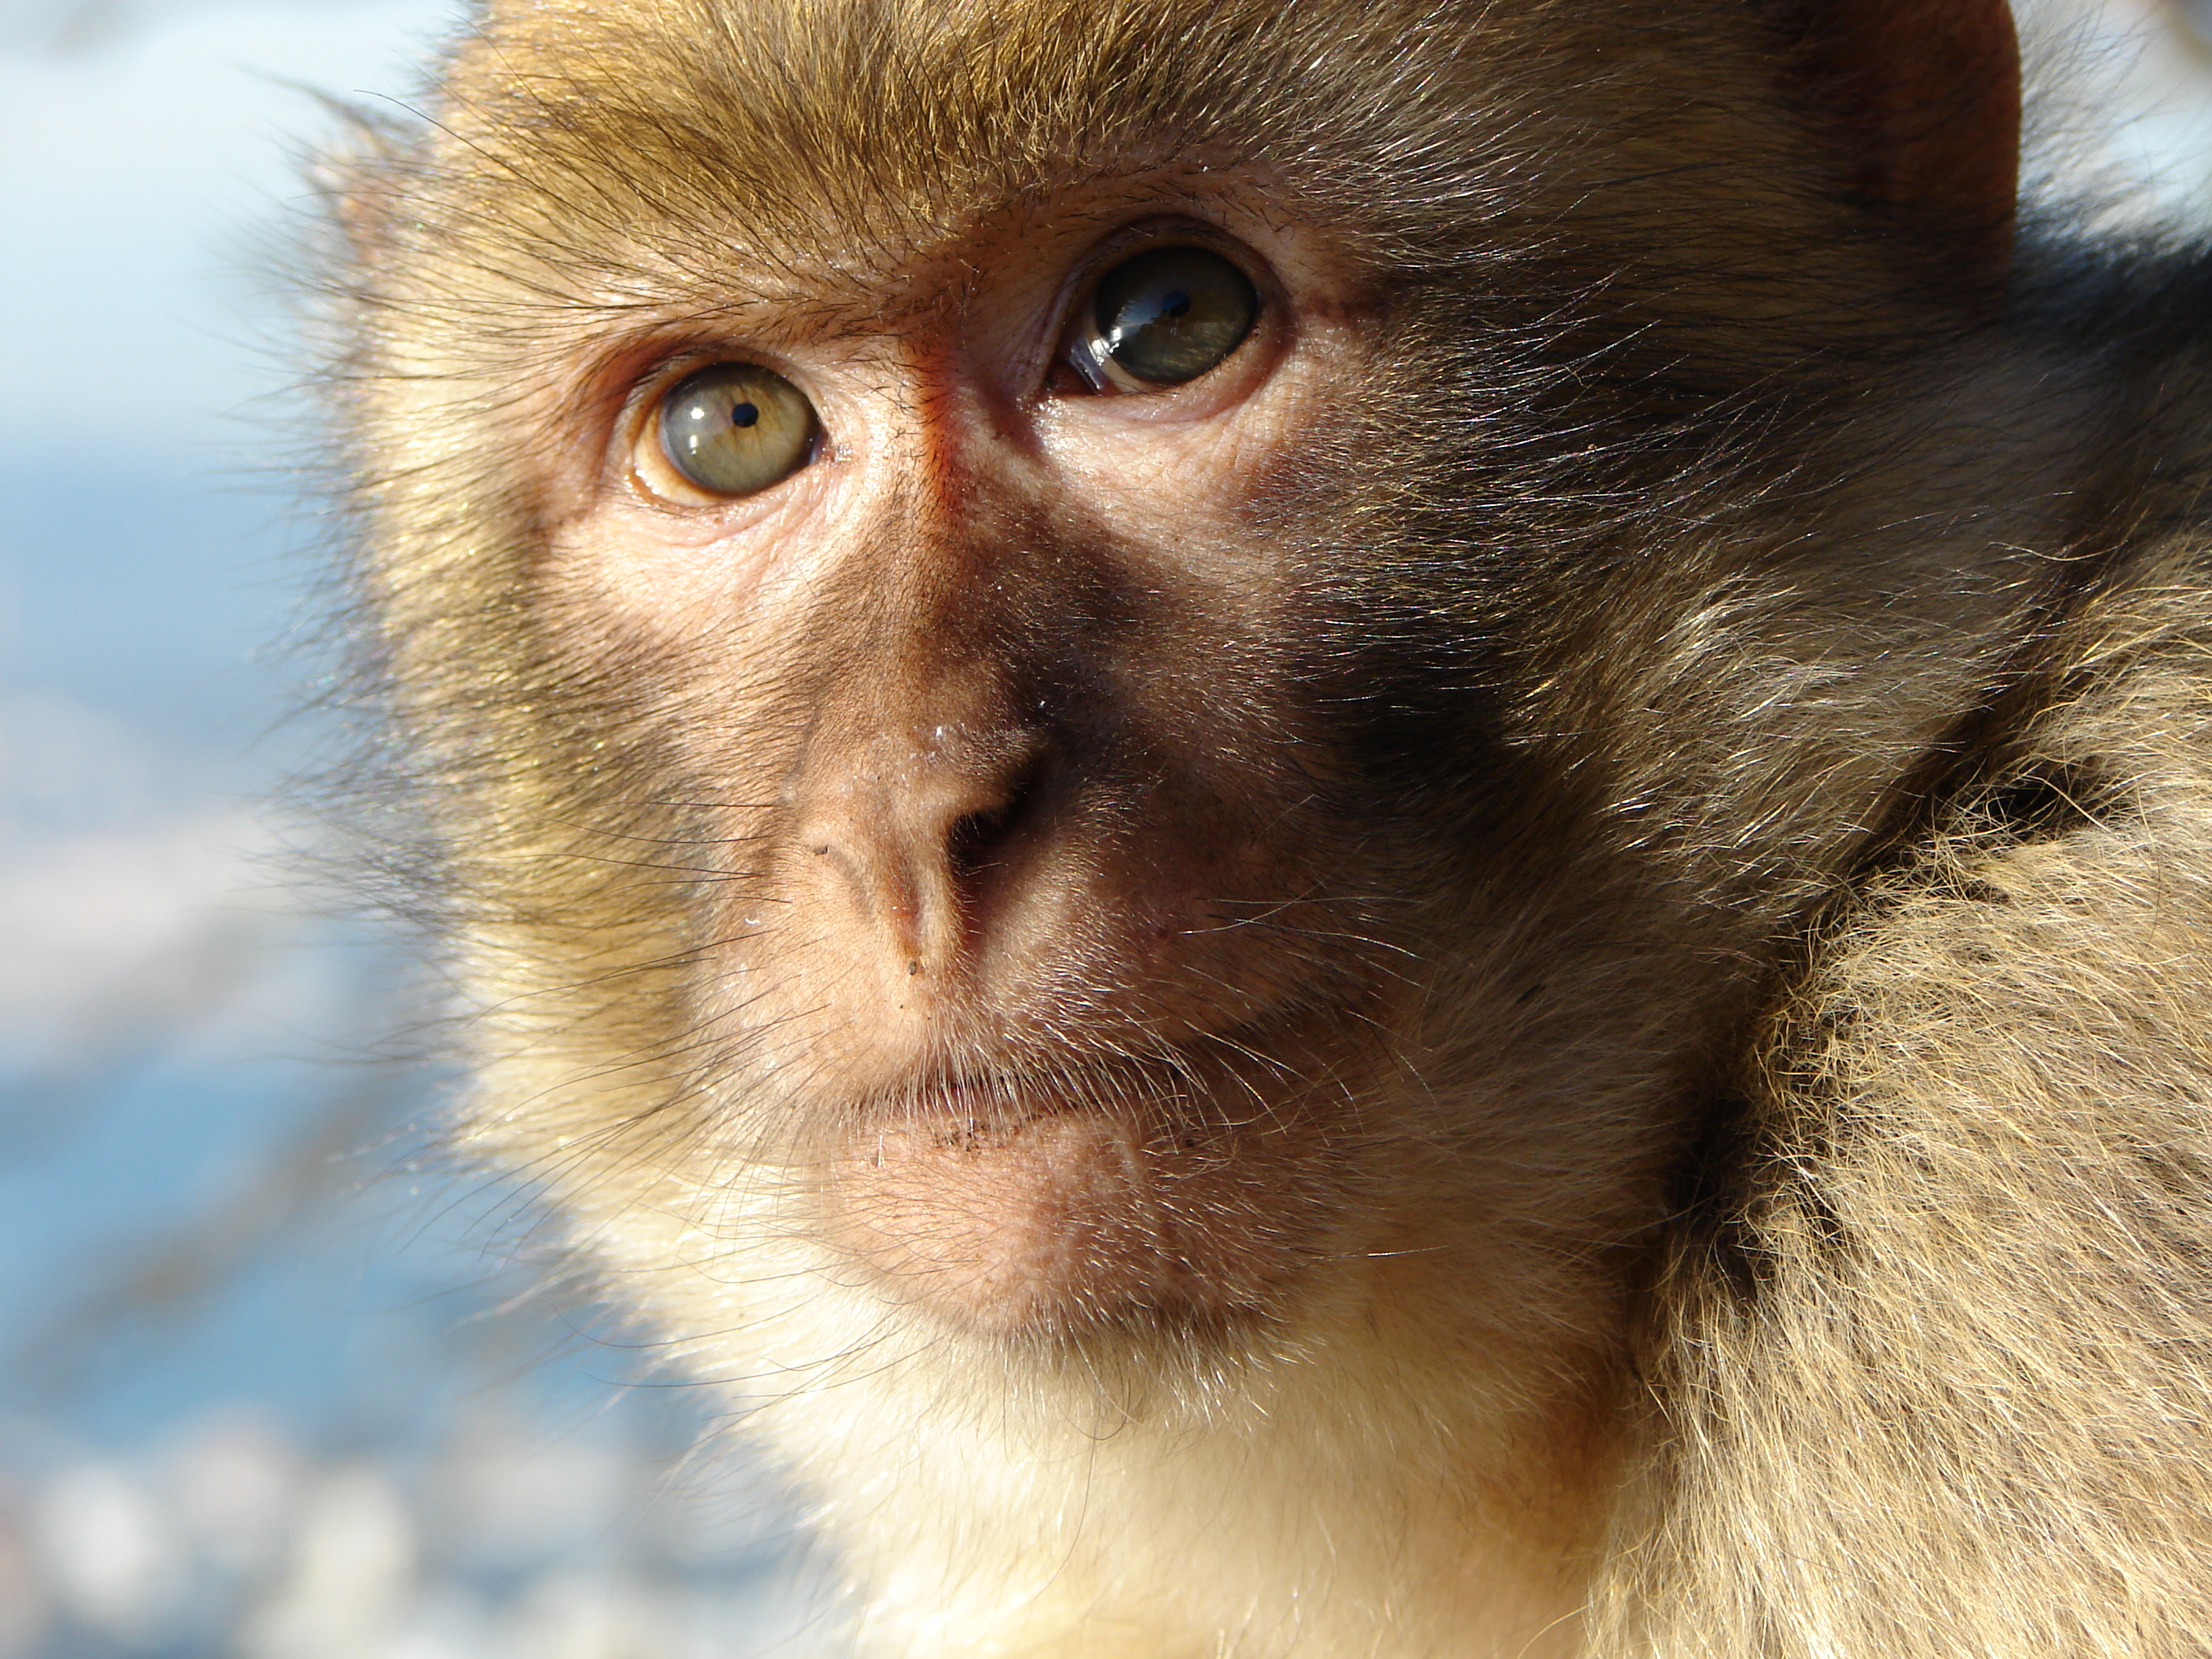 Synthetic embryos have been implanted into monkey wombs